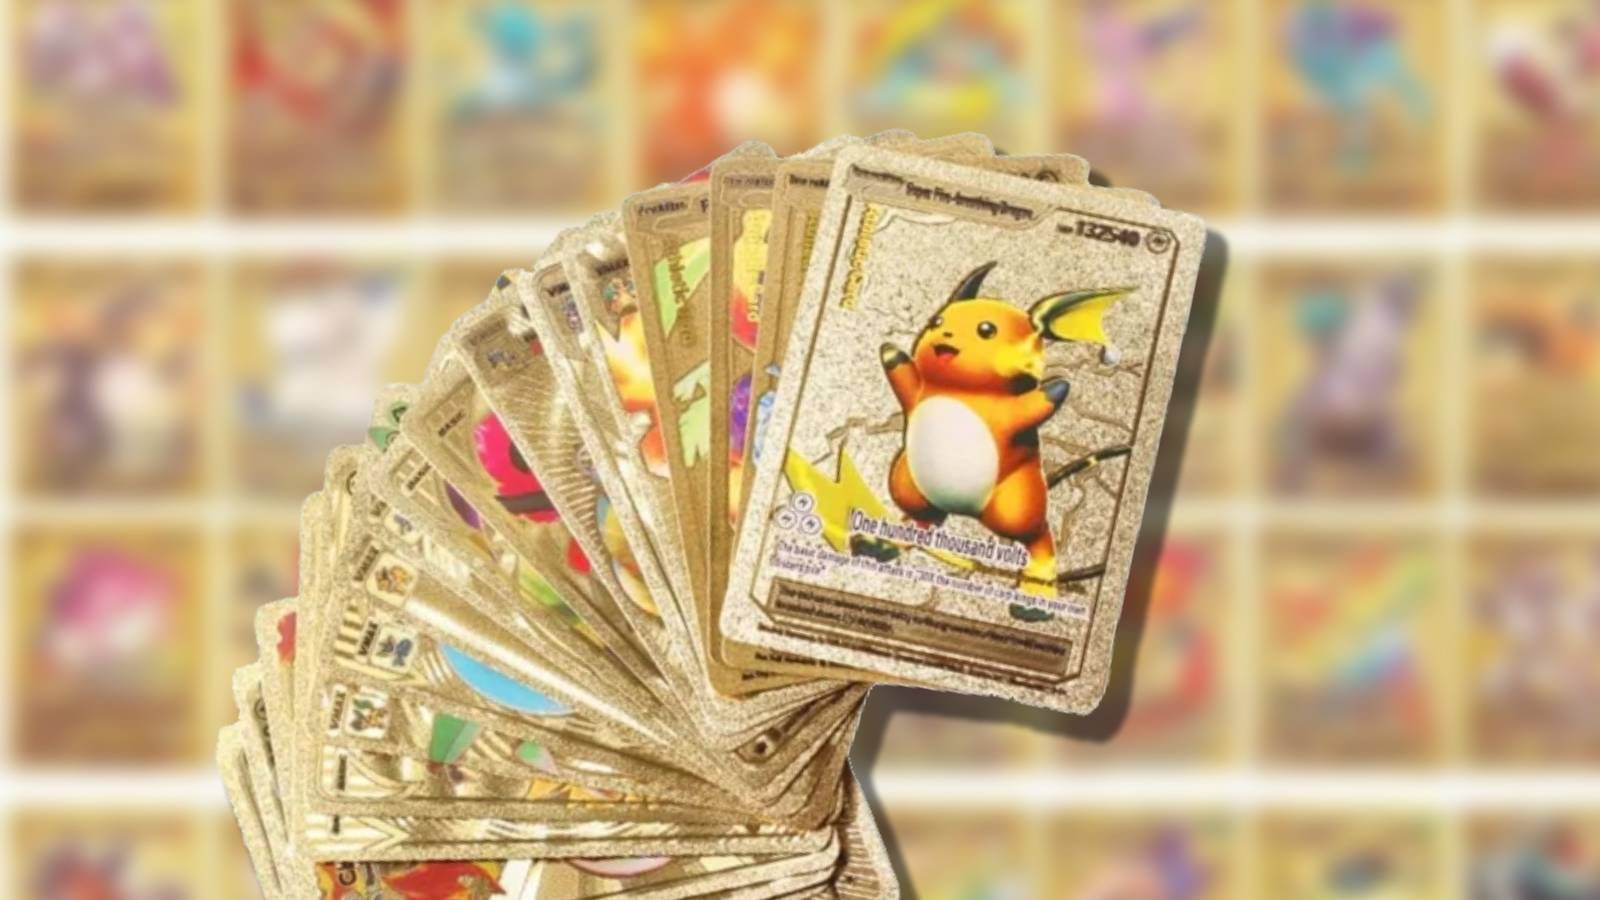 Several gold and possibly fake Pokemon cards are visible